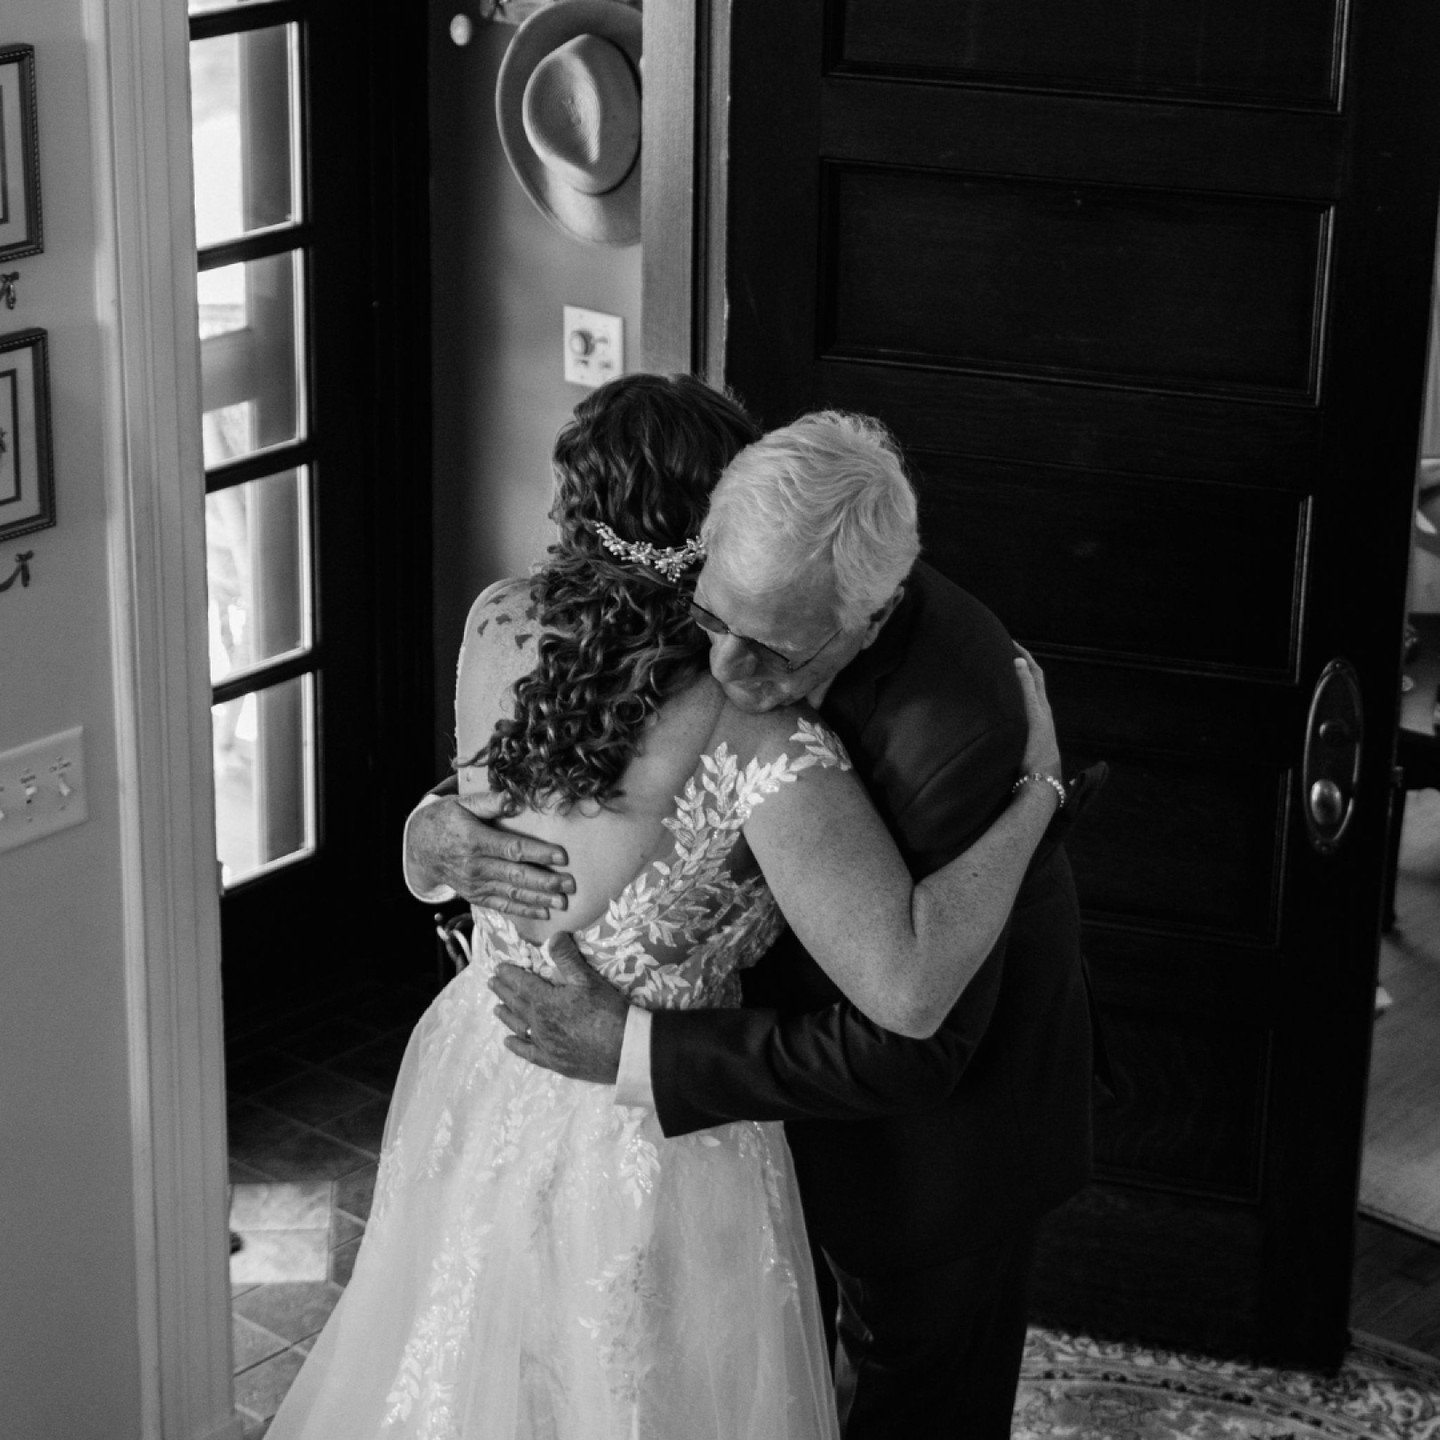 A tender moment between M and her father on wedding day, 
.
.
.
Venue: Private Residence	
Photography: @hannahfisherphotography_
Wedding Planning &amp; Design: @ljeventsma
Bride&rsquo;s Hair Stylist:  @roffisalon
Bride&rsquo;s Attire:  @kleinfeldbrid